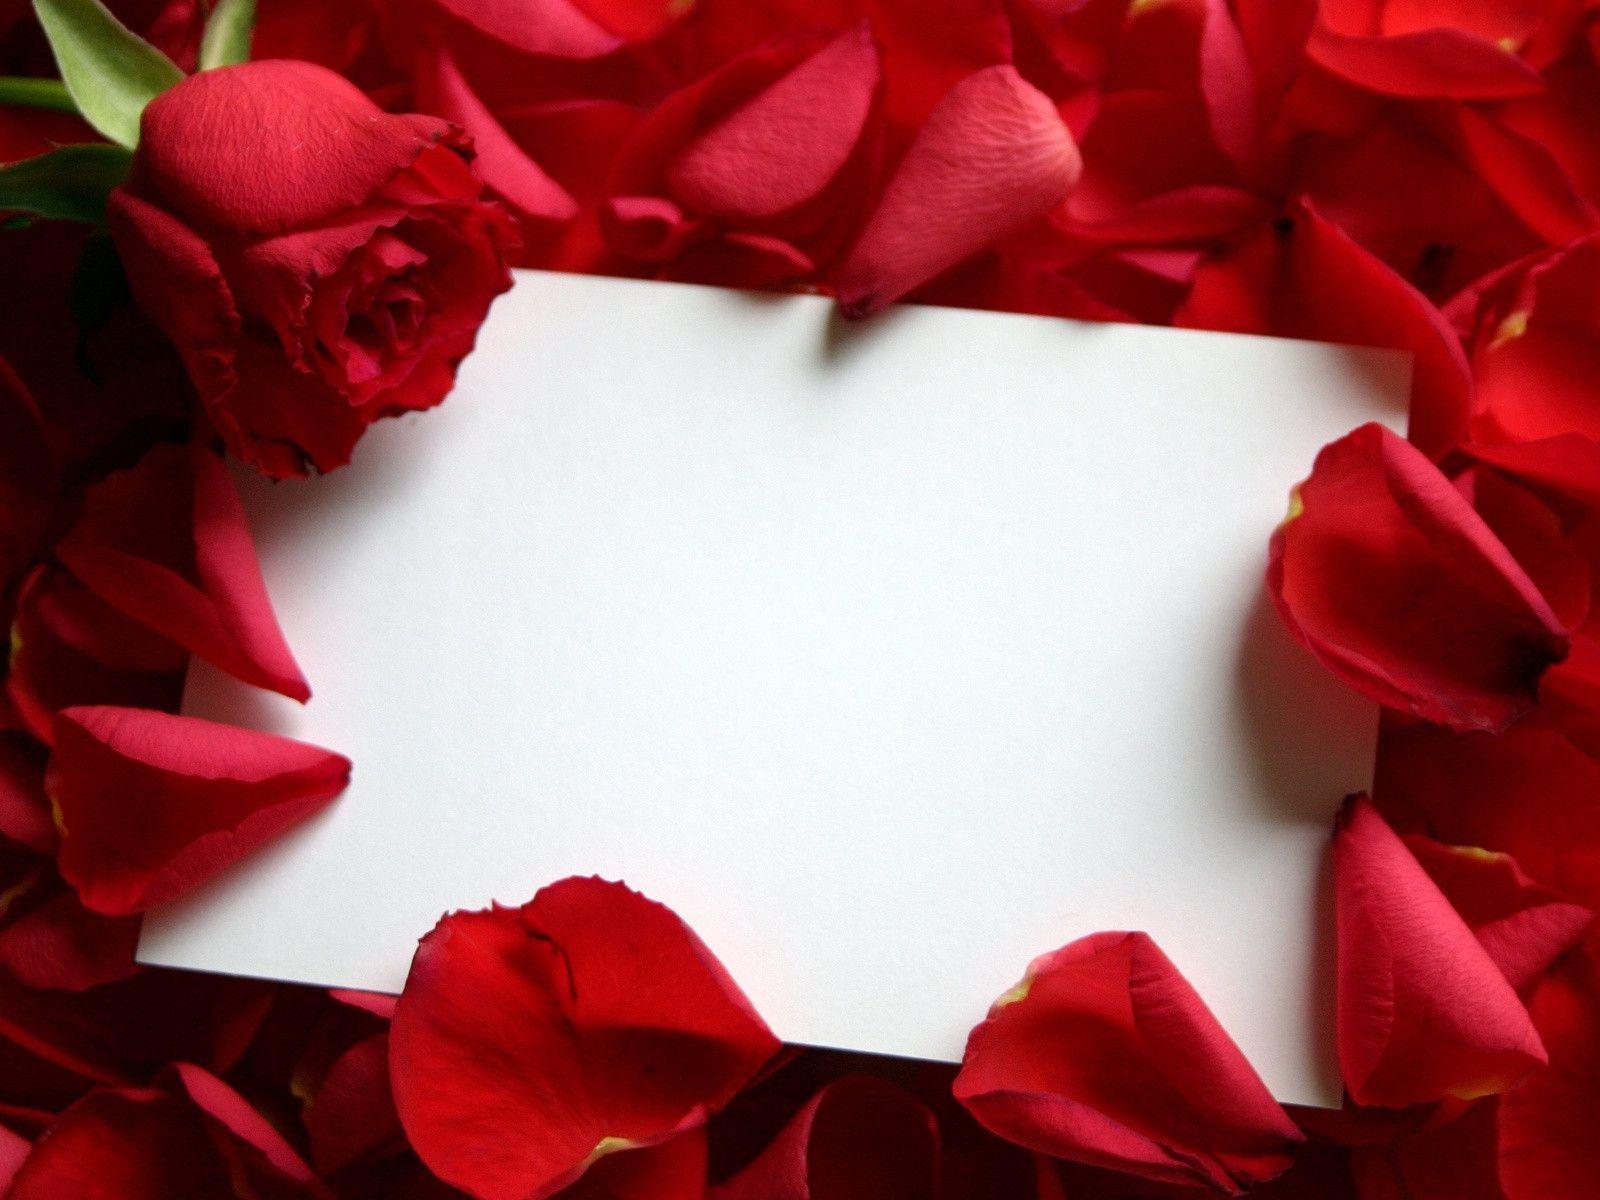 Empty Paper and Red Rose Petals Free and Wallpaper